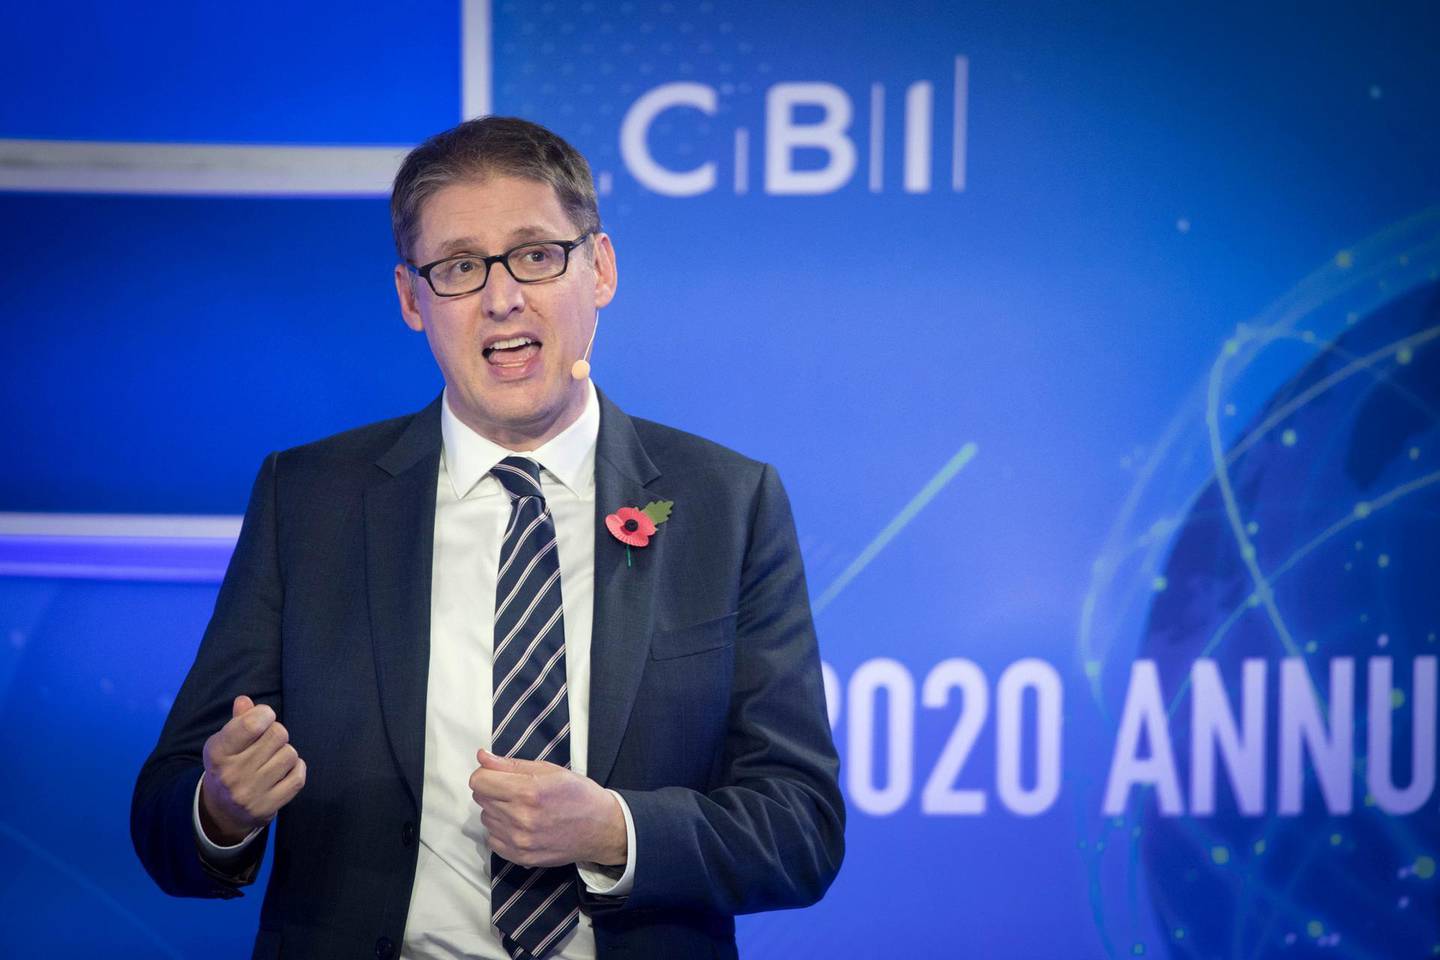 Tony Danker who will take over from Dame Carolyn Fairbairn as Director General of the CBI on November 30, addresses the CBI annual conference in central London. (Photo by Stefan Rousseau/PA Images via Getty Images)